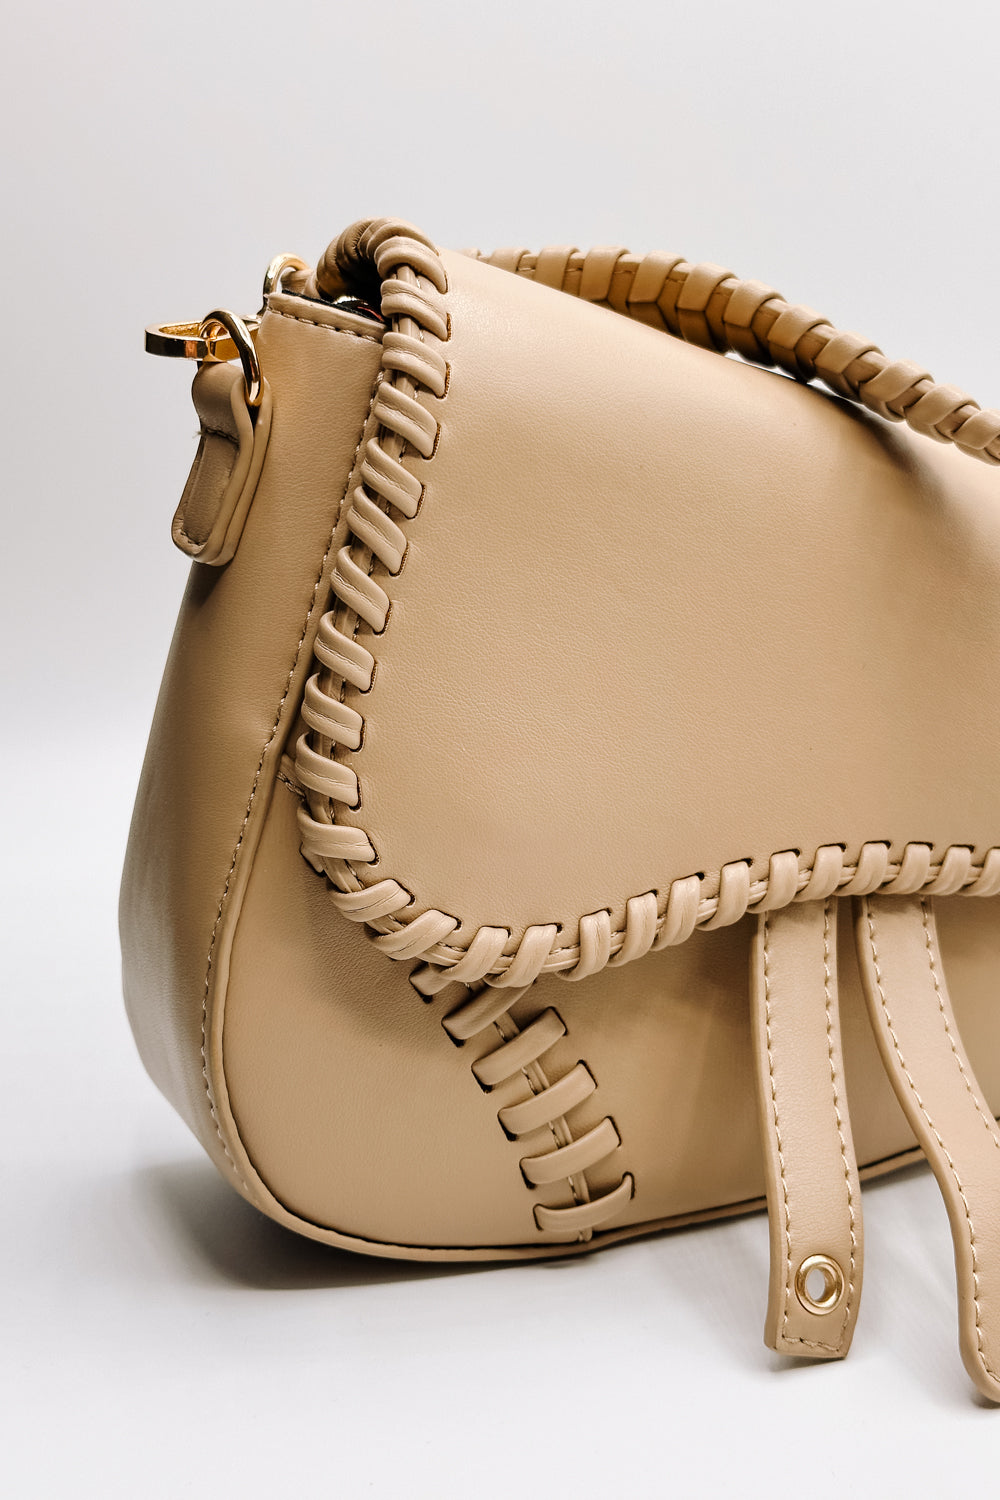 Front view of the Sloane Sand Leather Braided Strap Purse which features tan leather fabric, braided details, gold clasp closure, braided strap, tan lining and curvy hem shape